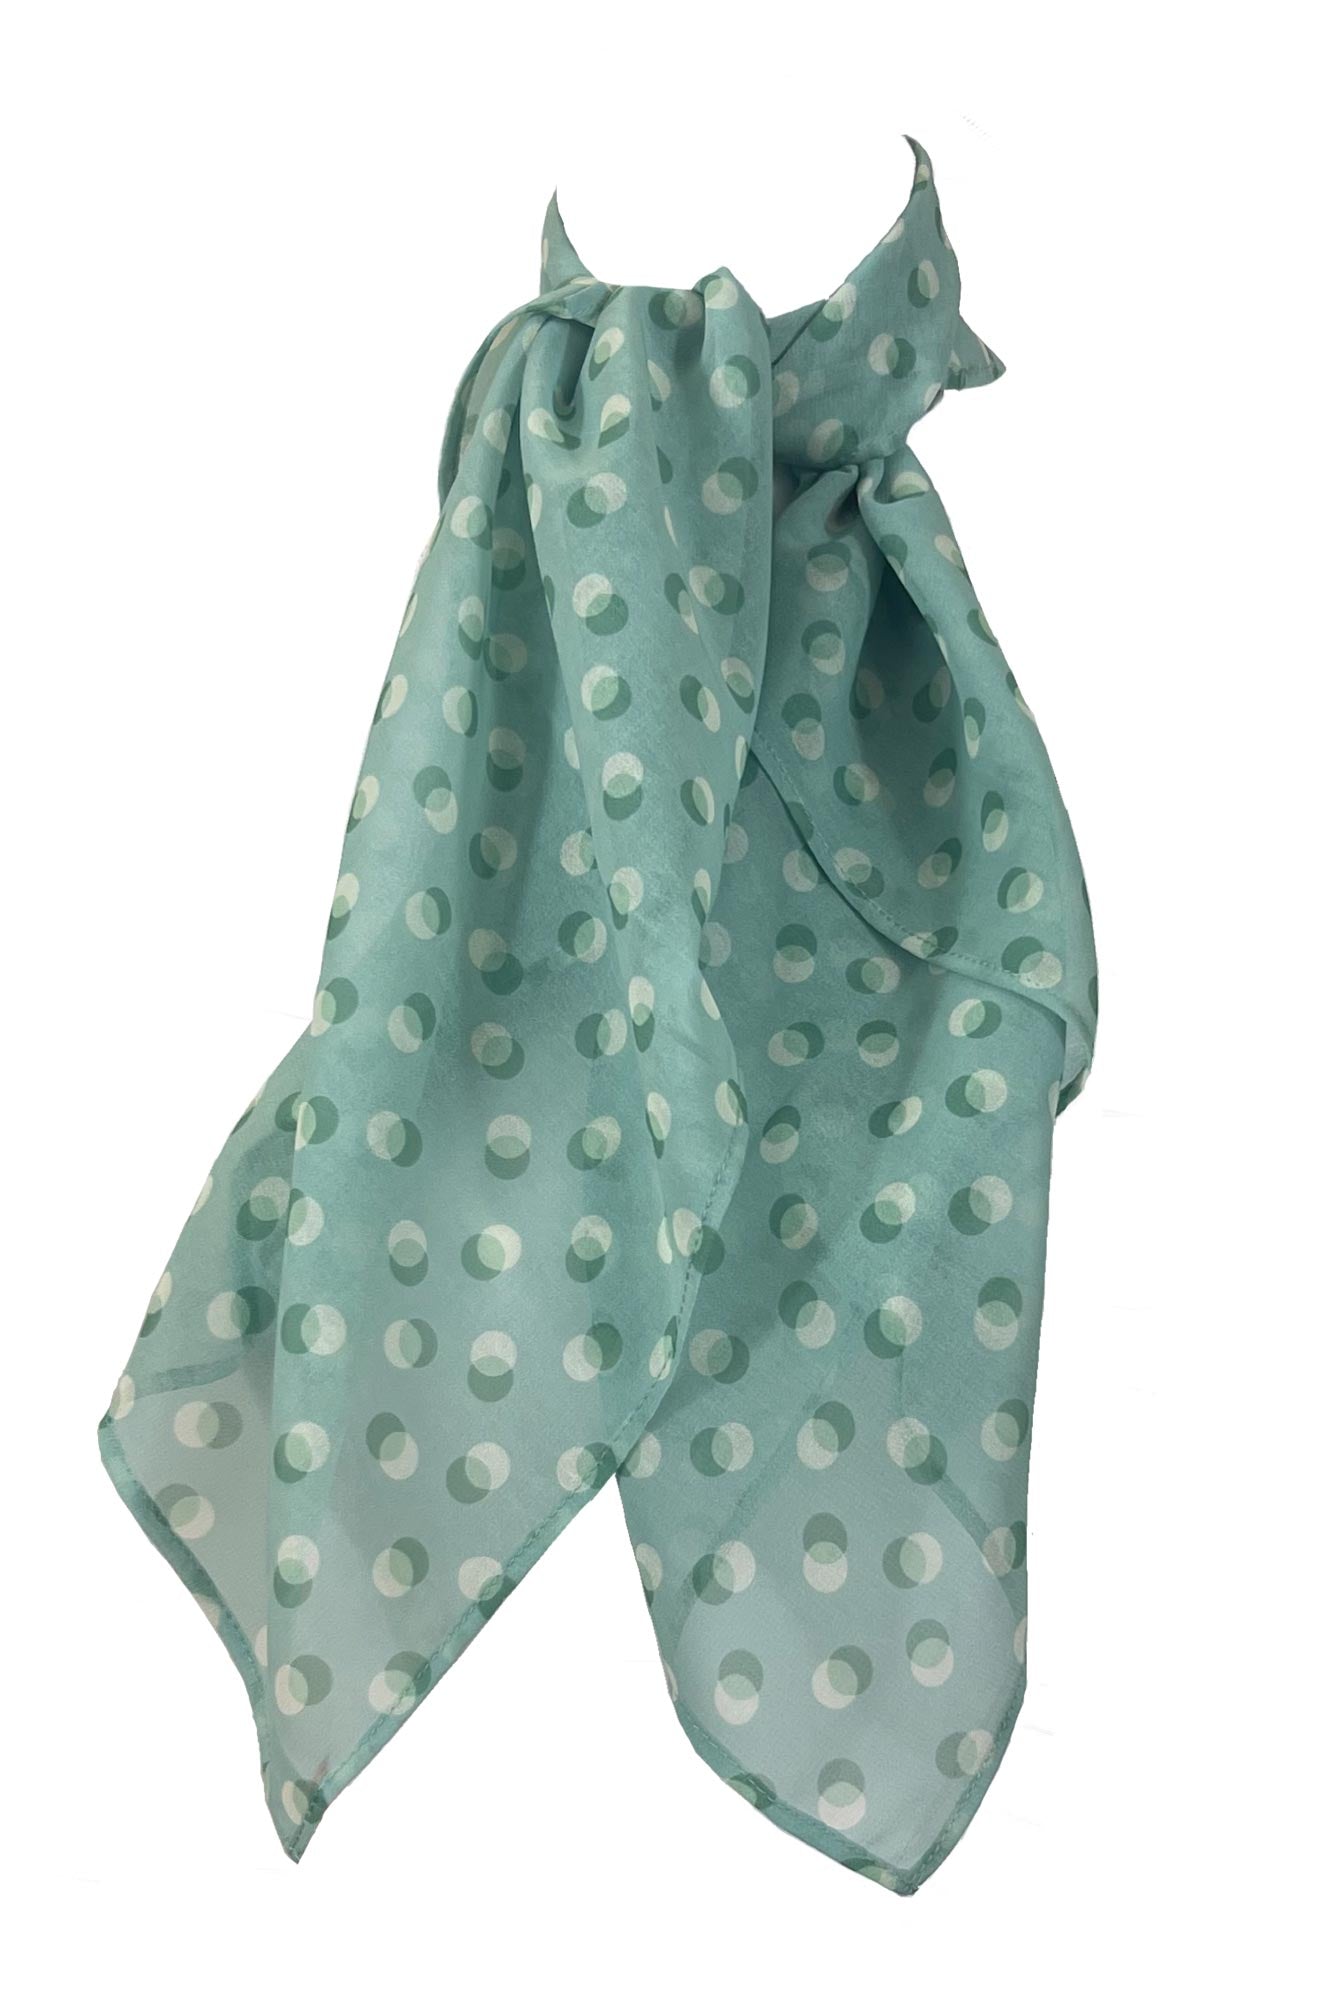 Scarf in Green with Green & White Polka Dots